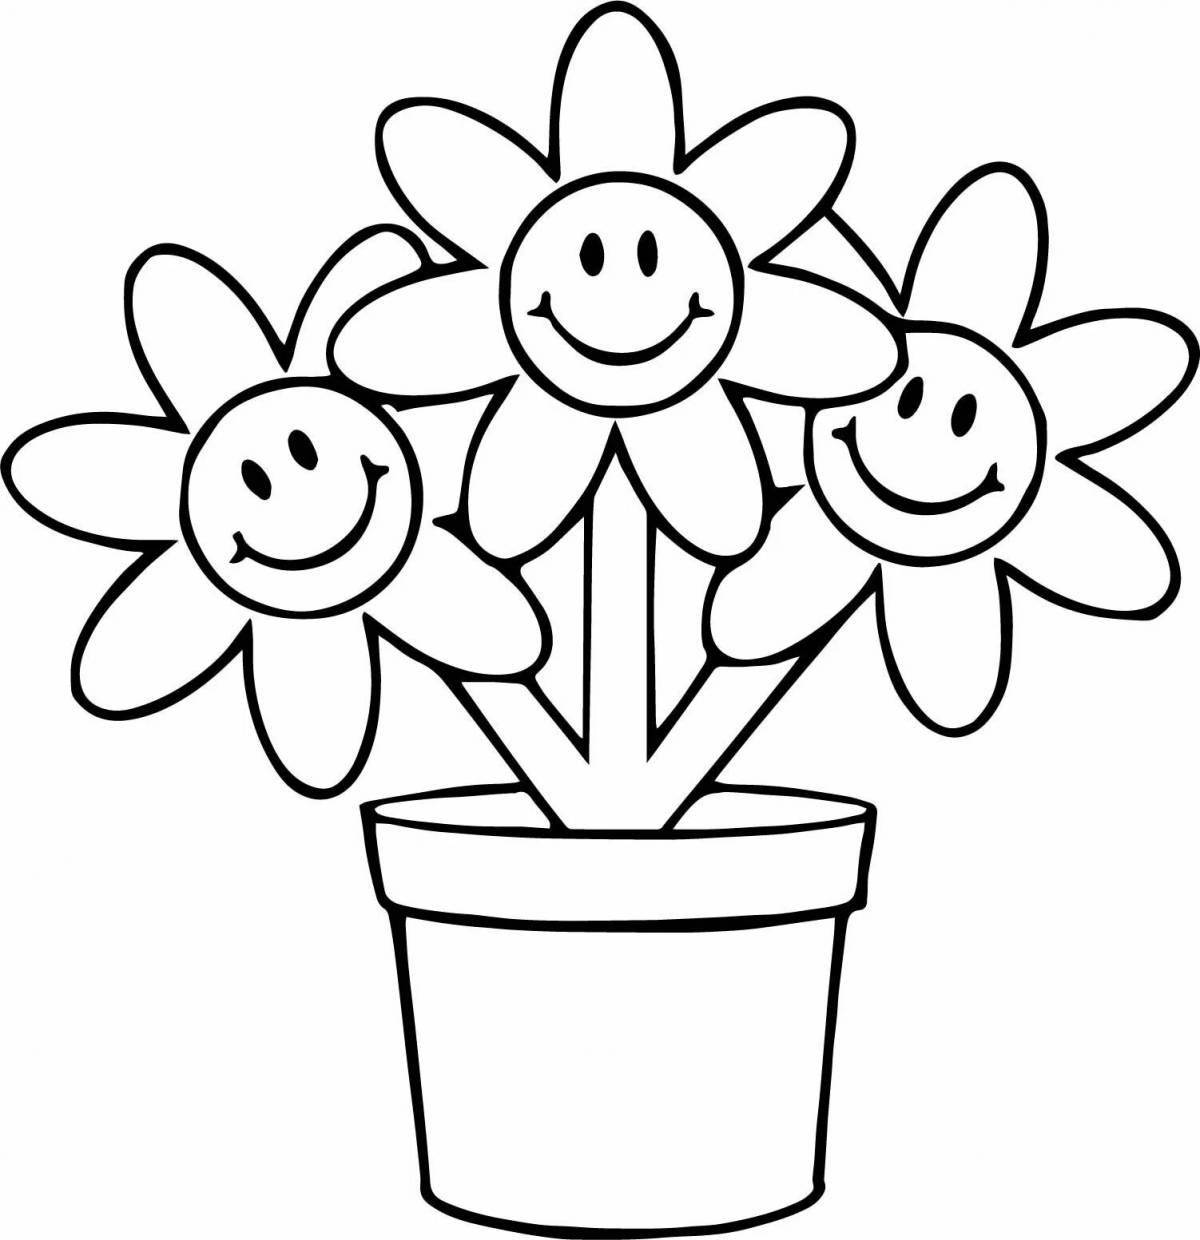 Playful flower coloring for children 4-5 years old